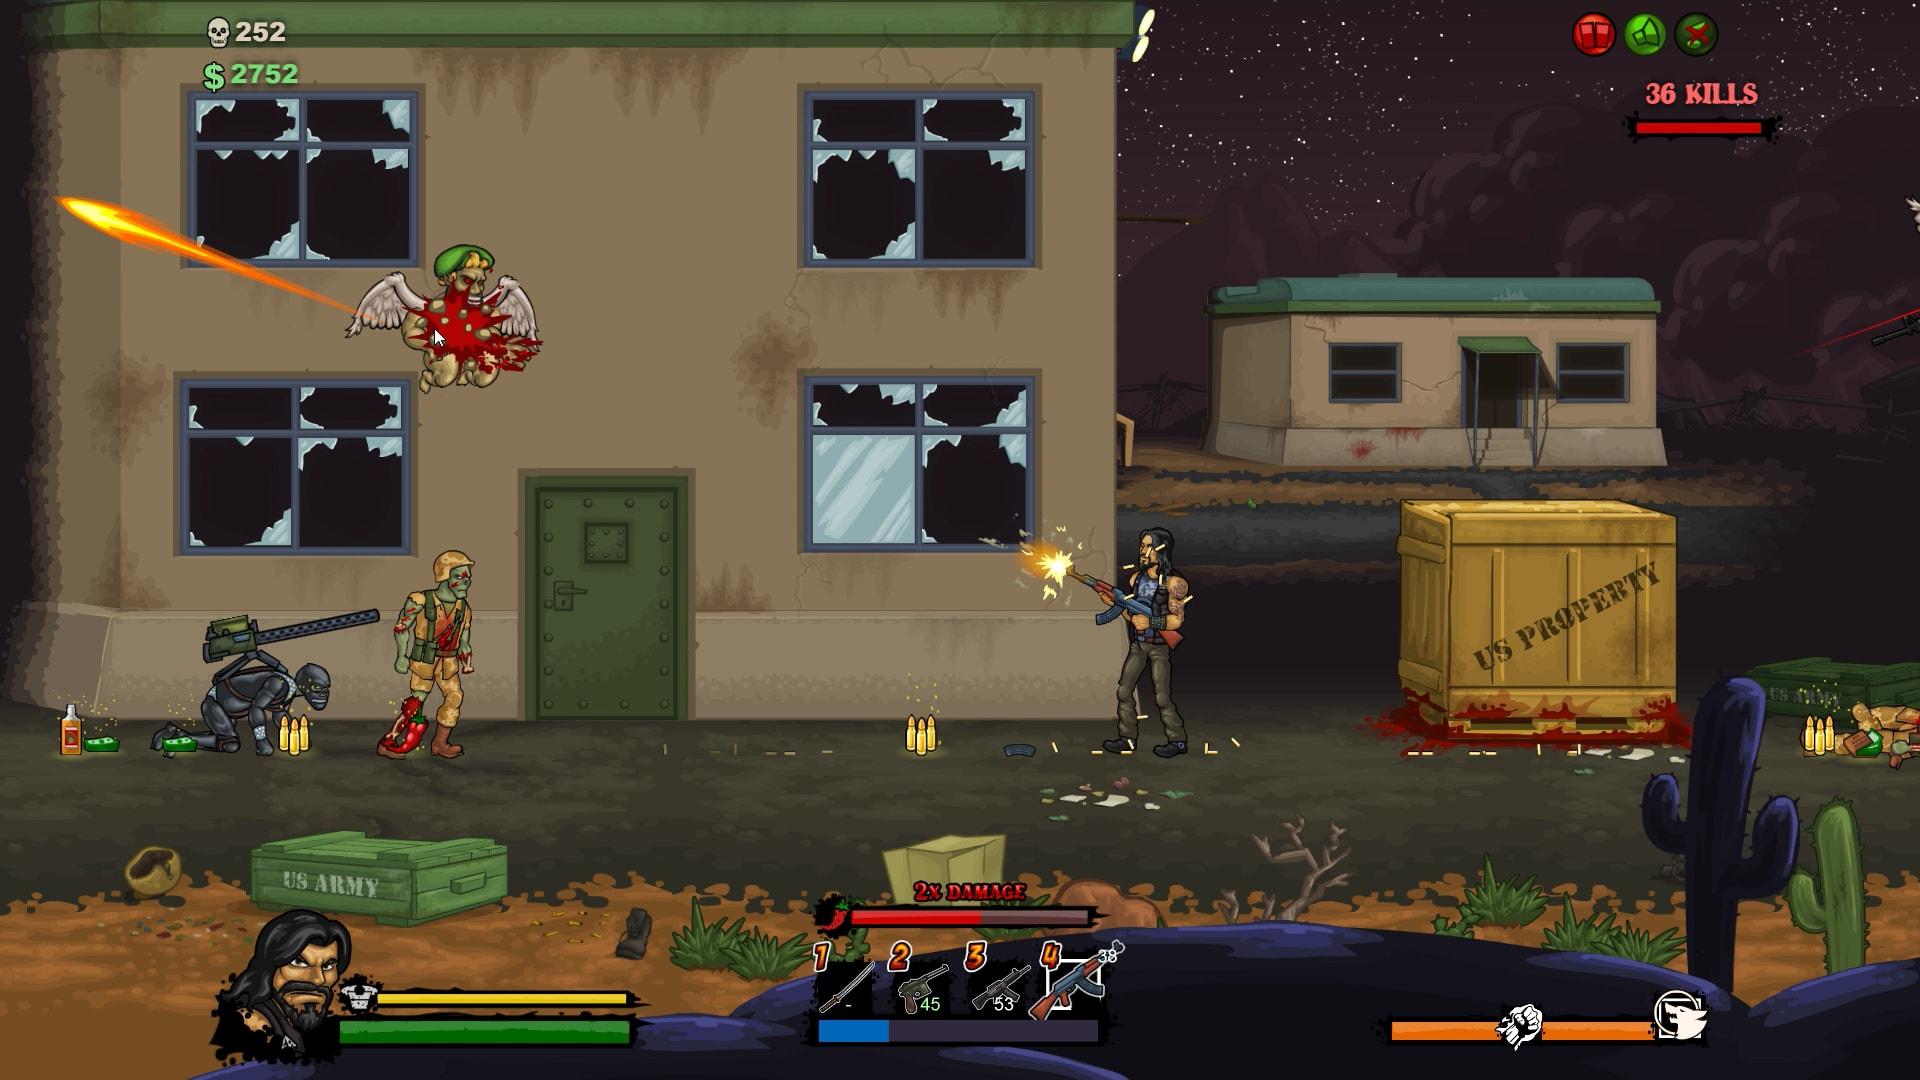 Screenshot №6 from game Tequila Zombies 3